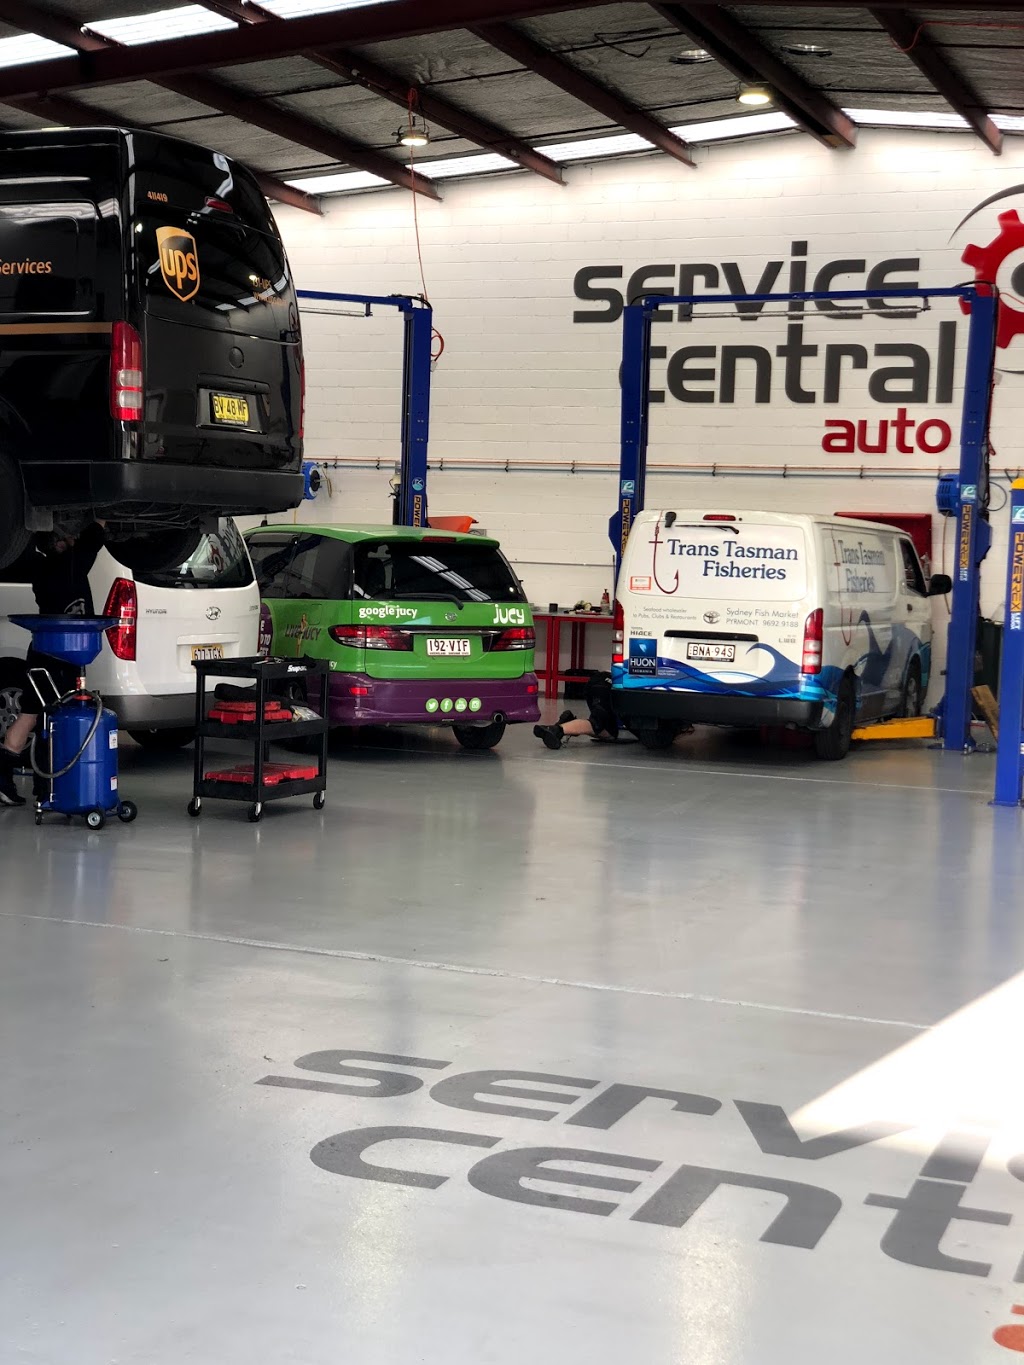 Service Central Auto | car repair | 2/15 Margate St, Botany NSW 2019, Australia | 0293167373 OR +61 2 9316 7373